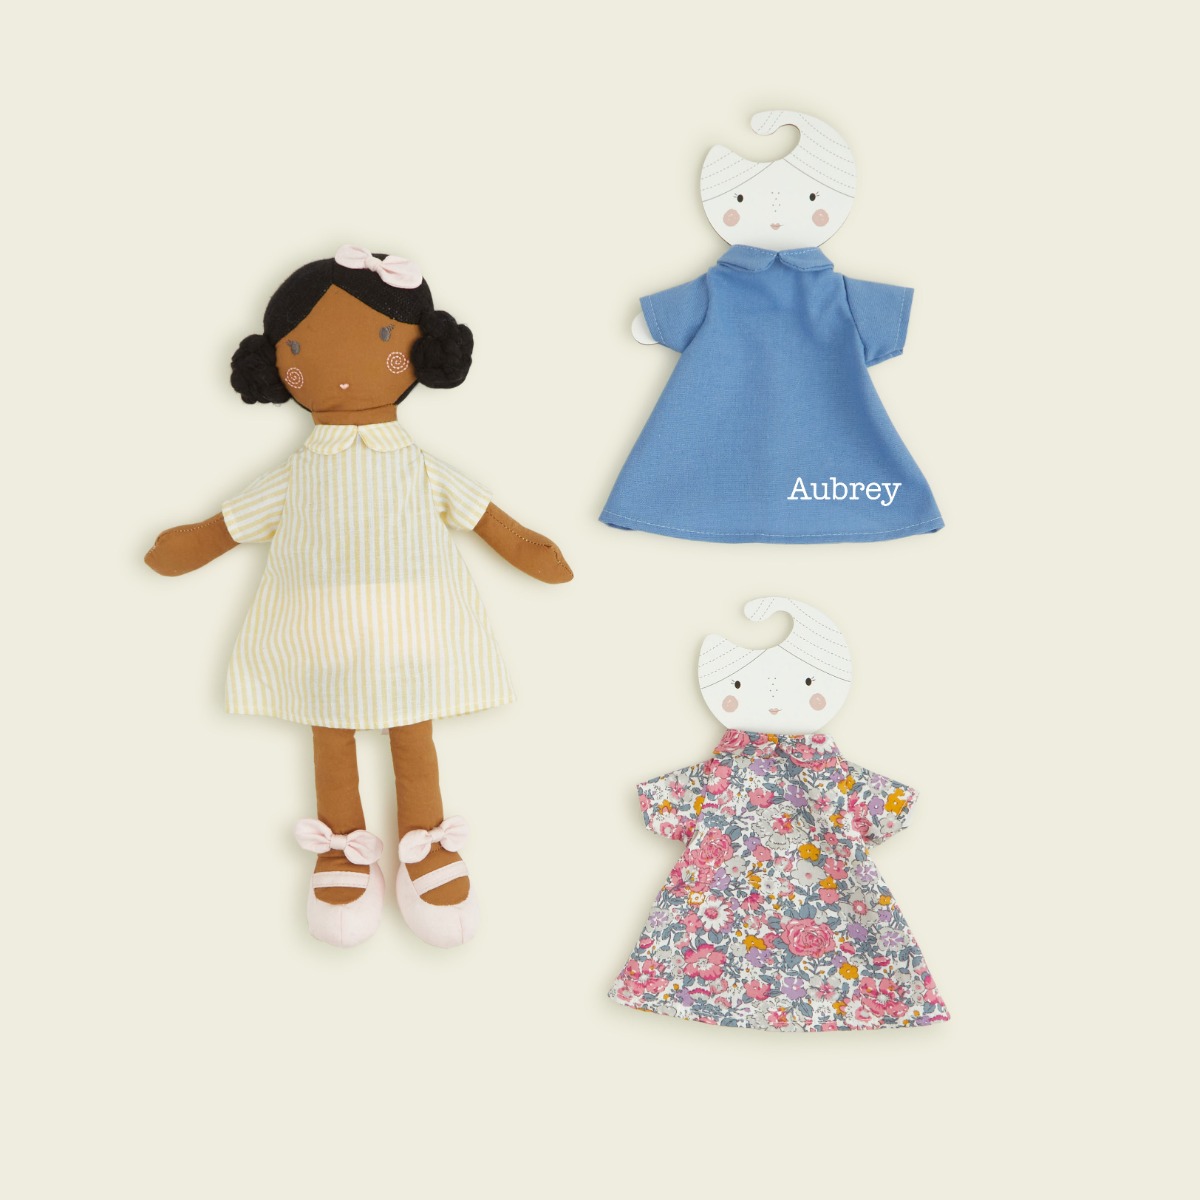 Personalised My 1st Doll Dresses (Denim, Floral and Stripe 3 Pack)